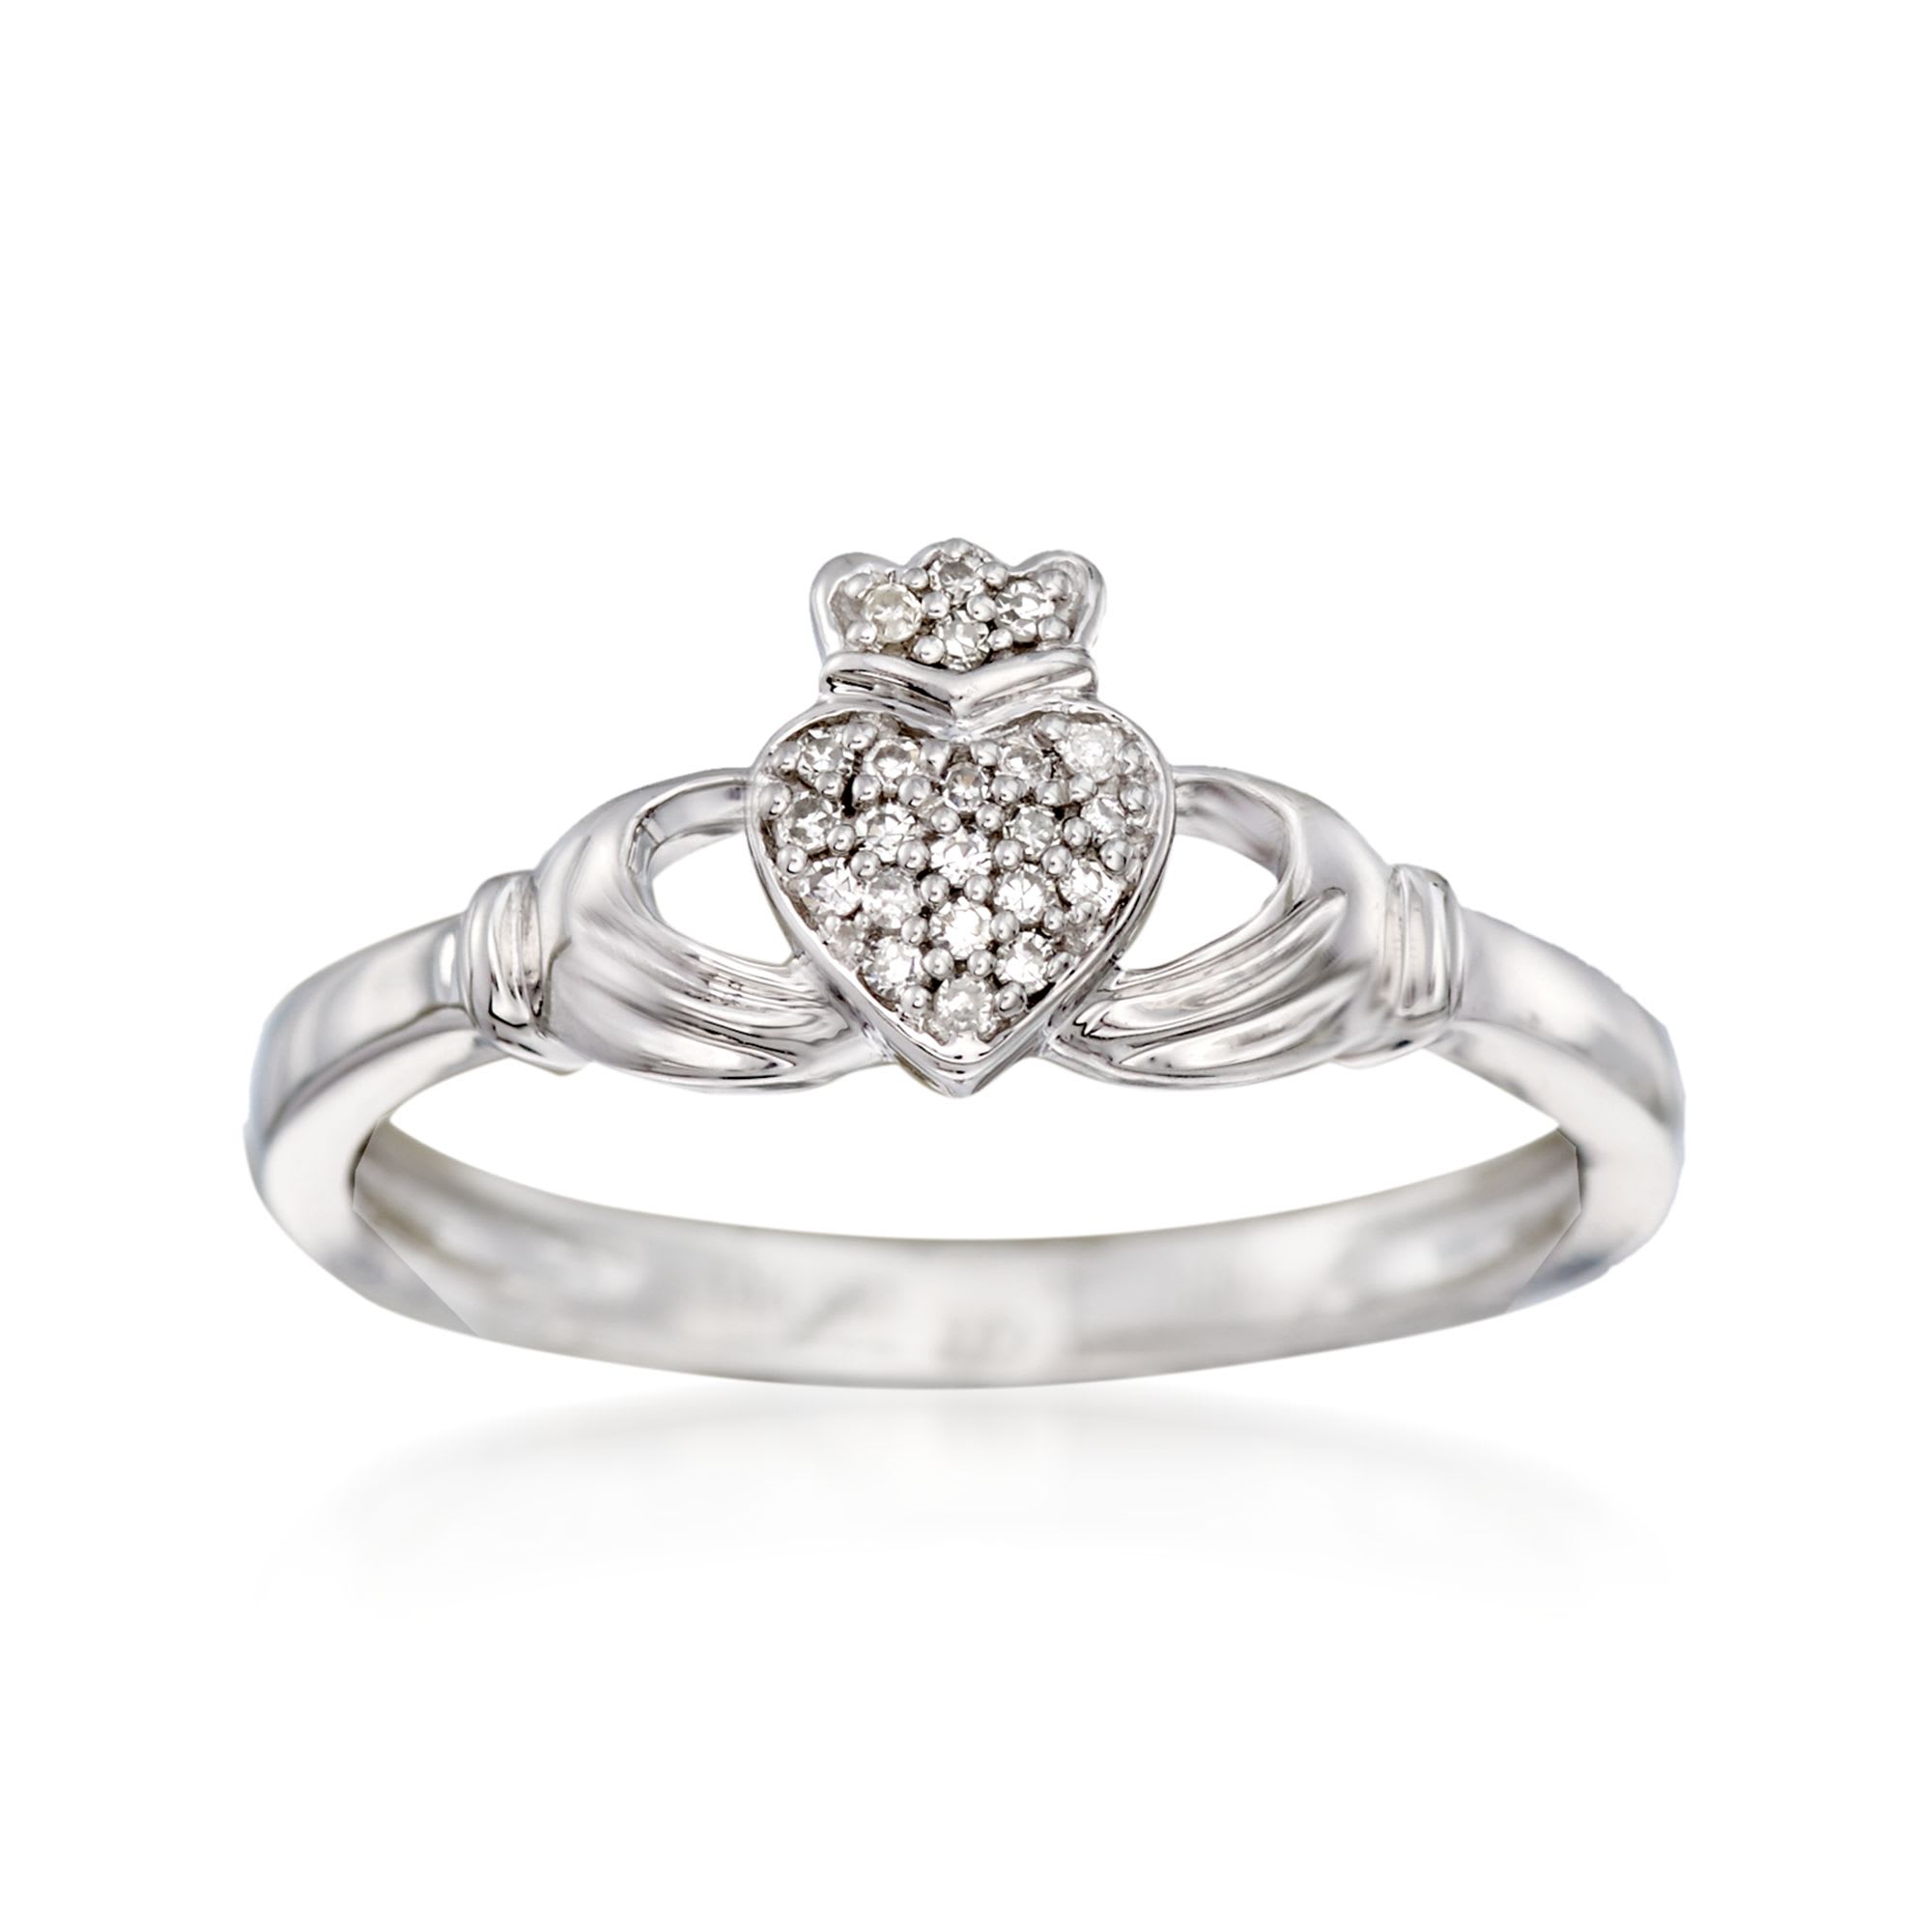 14kt White Gold Claddagh Ring with Diamond Accents | Ross-Simons